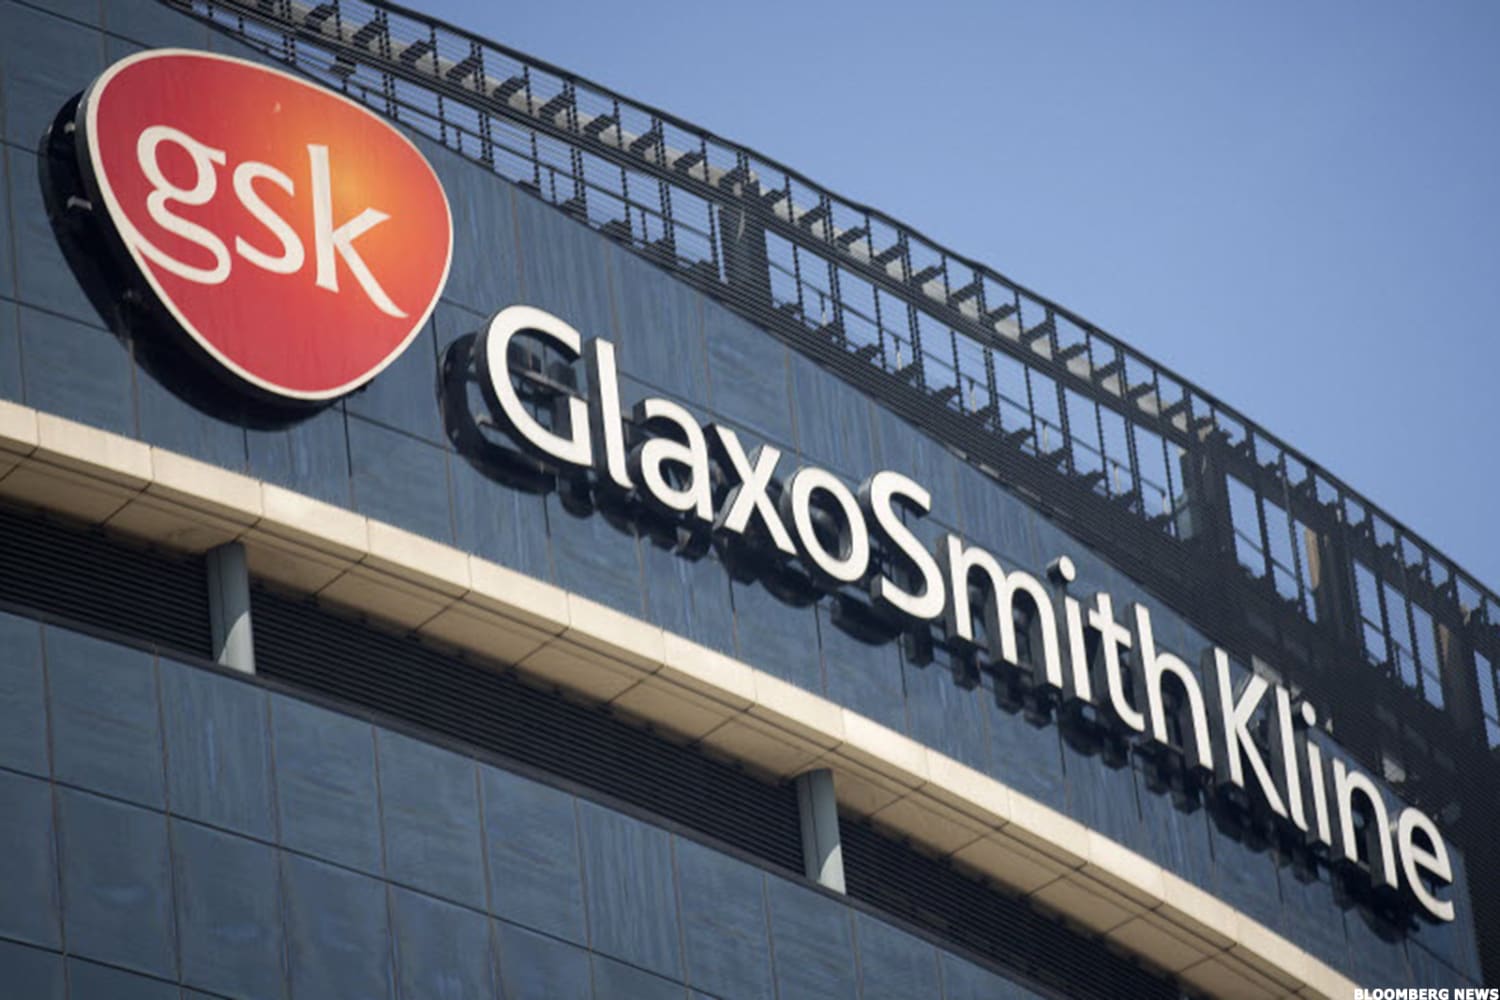 GlaxoSmithKline: The Charts Are Pointing Higher